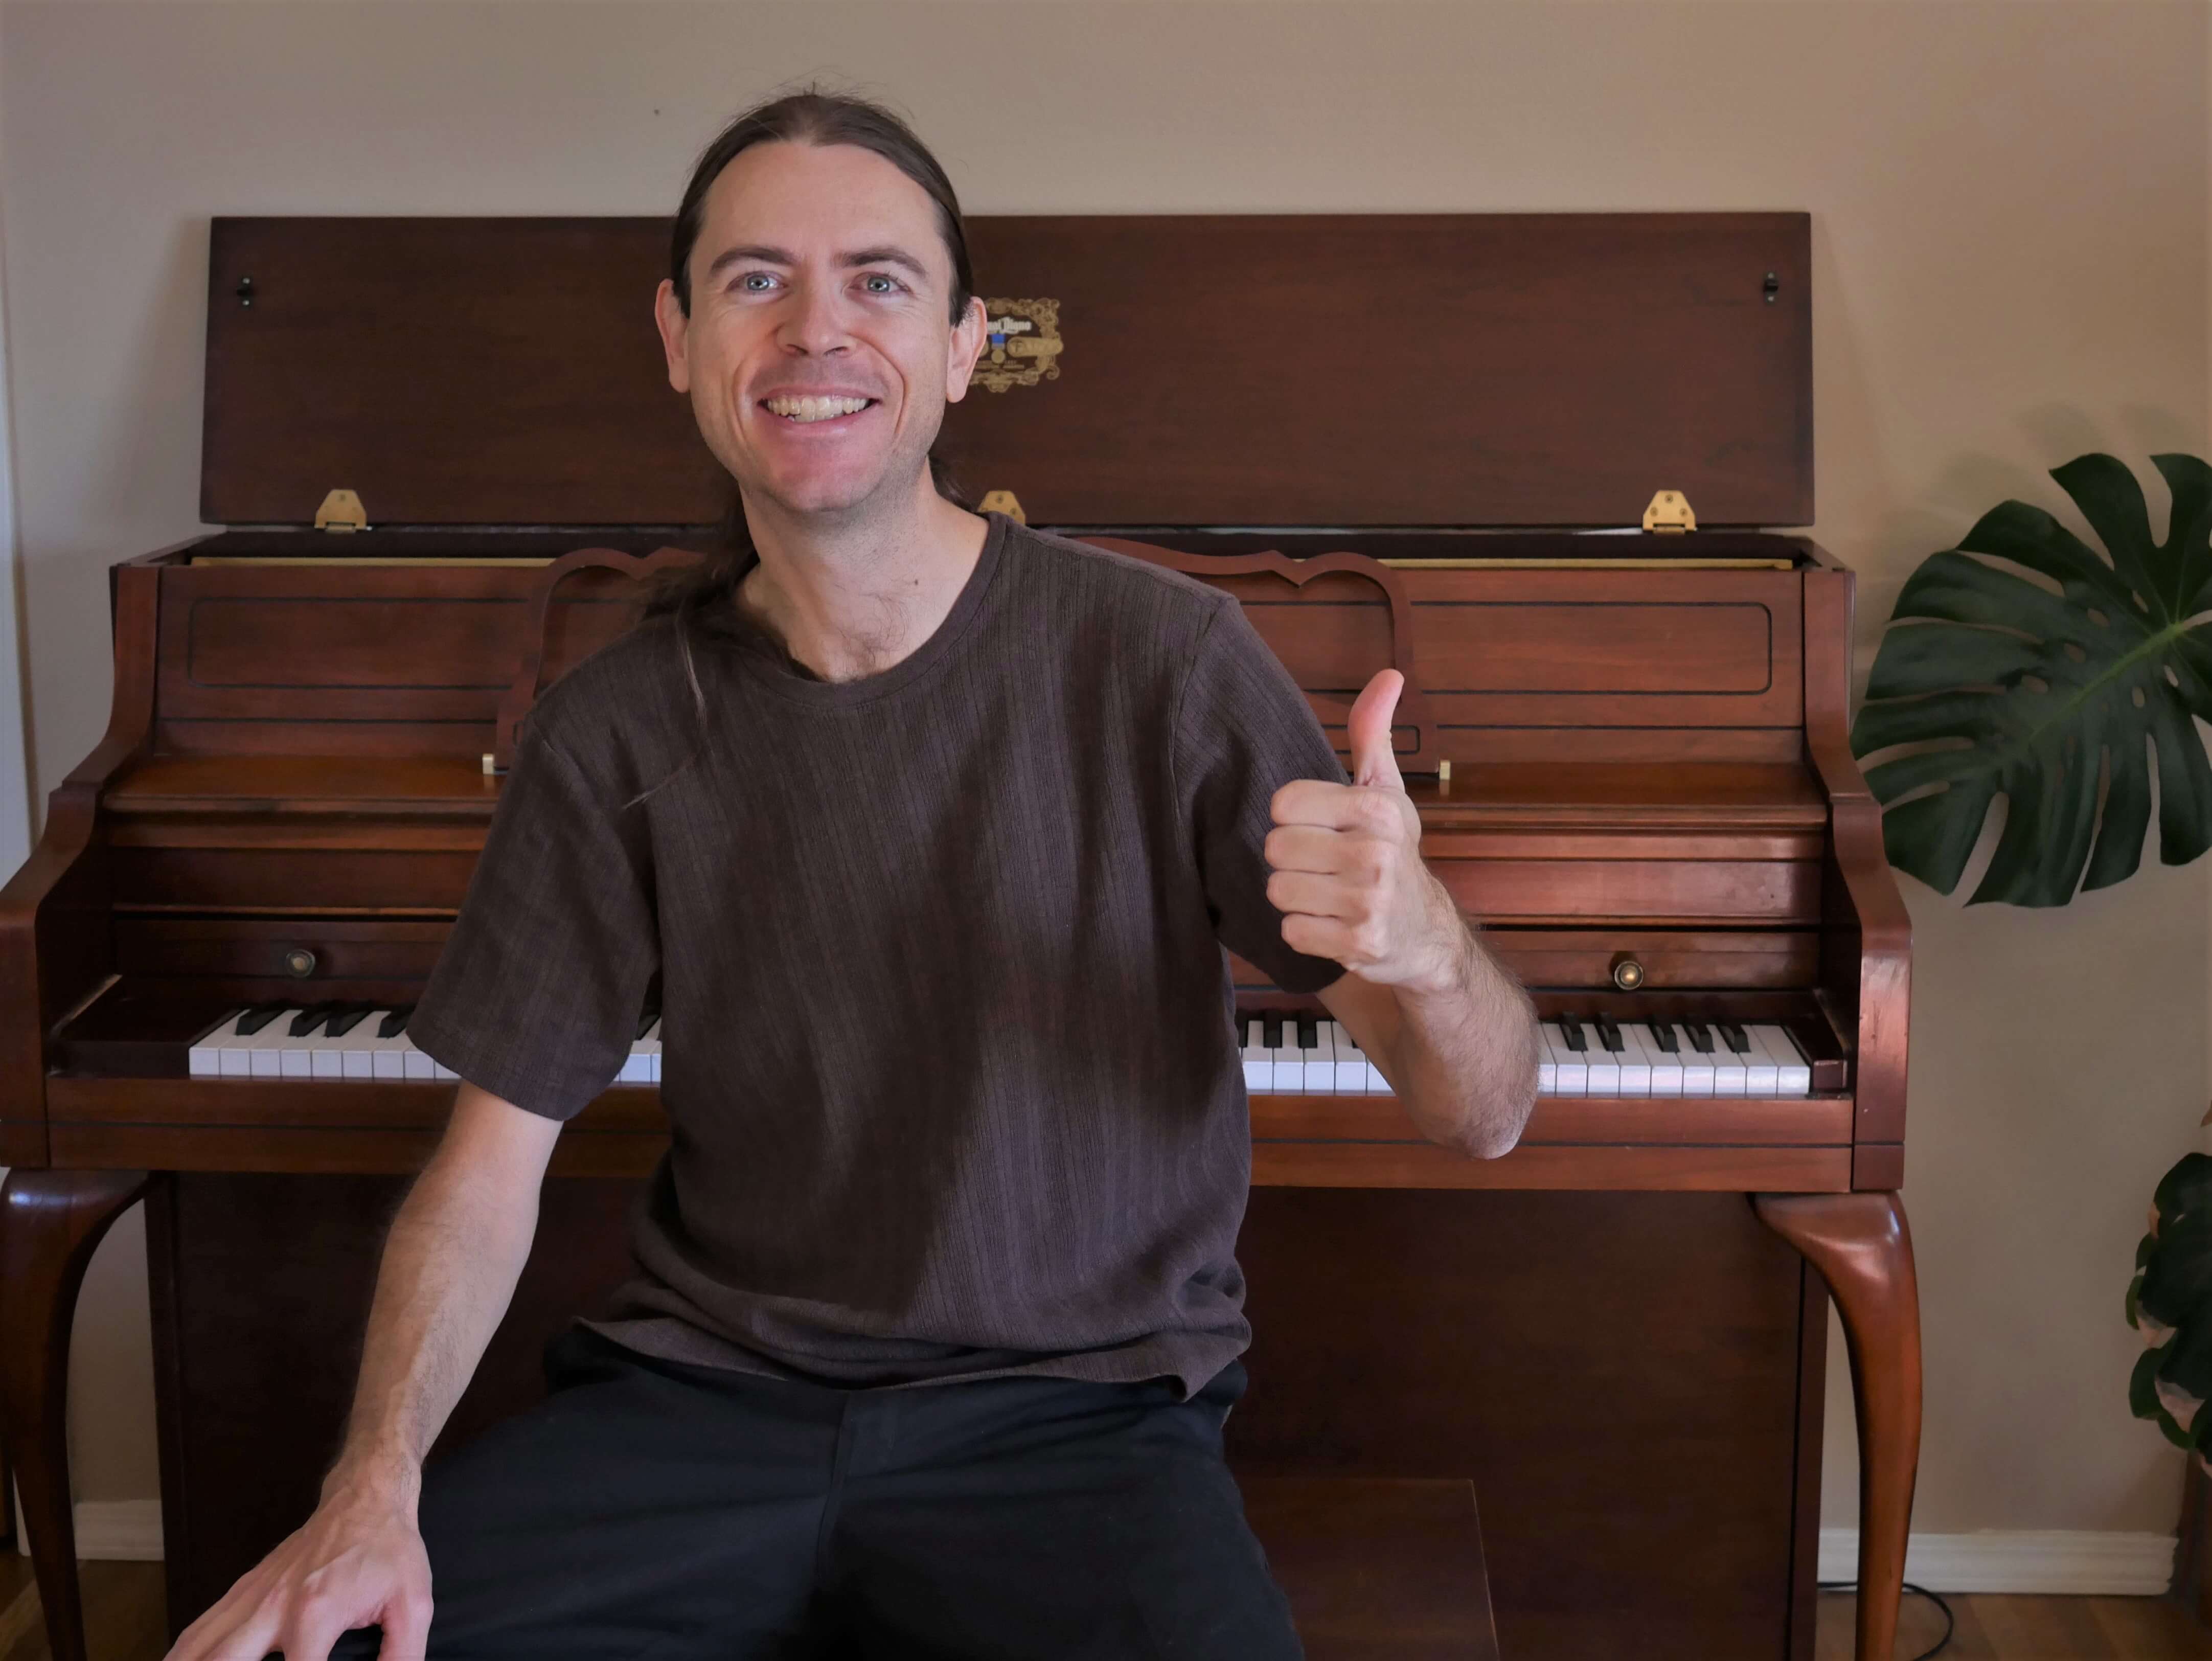 Instructor Nick smiling broadly and giving you a thumbs up!  Let's have fun working together to achieve your music goals!